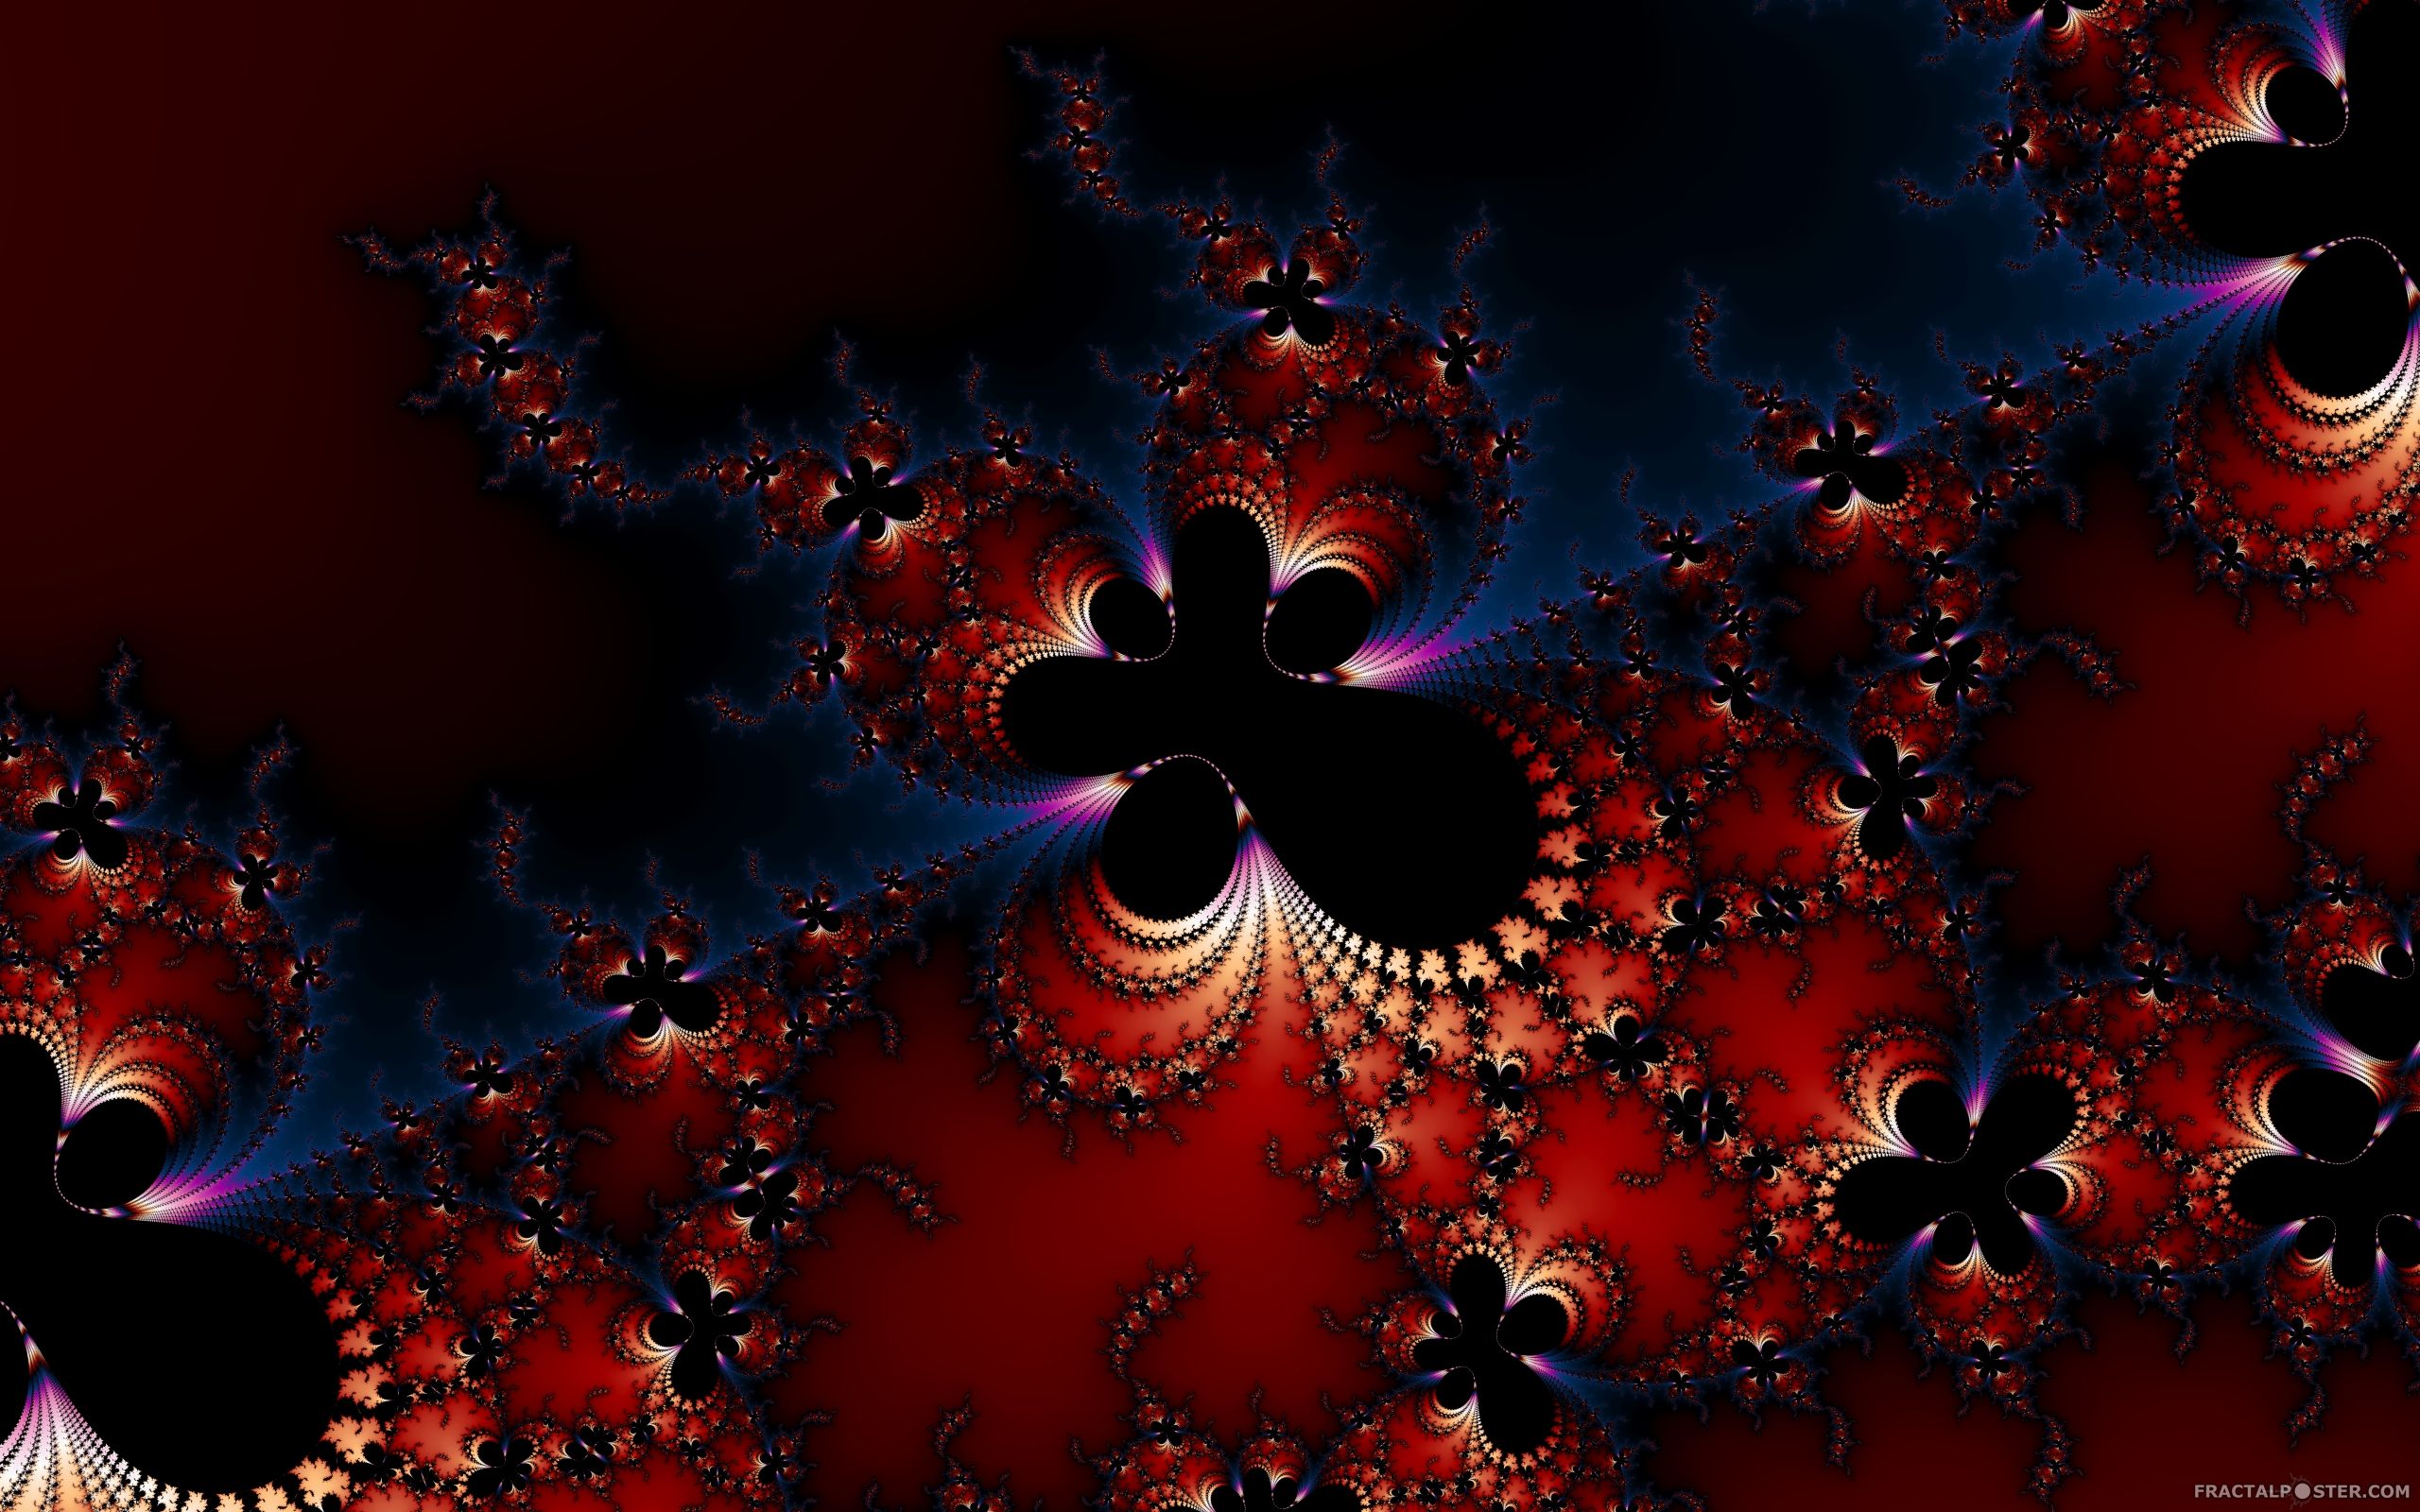 dark energy fractal image by e_samot. HD Wallpaper, posters, comments and rates